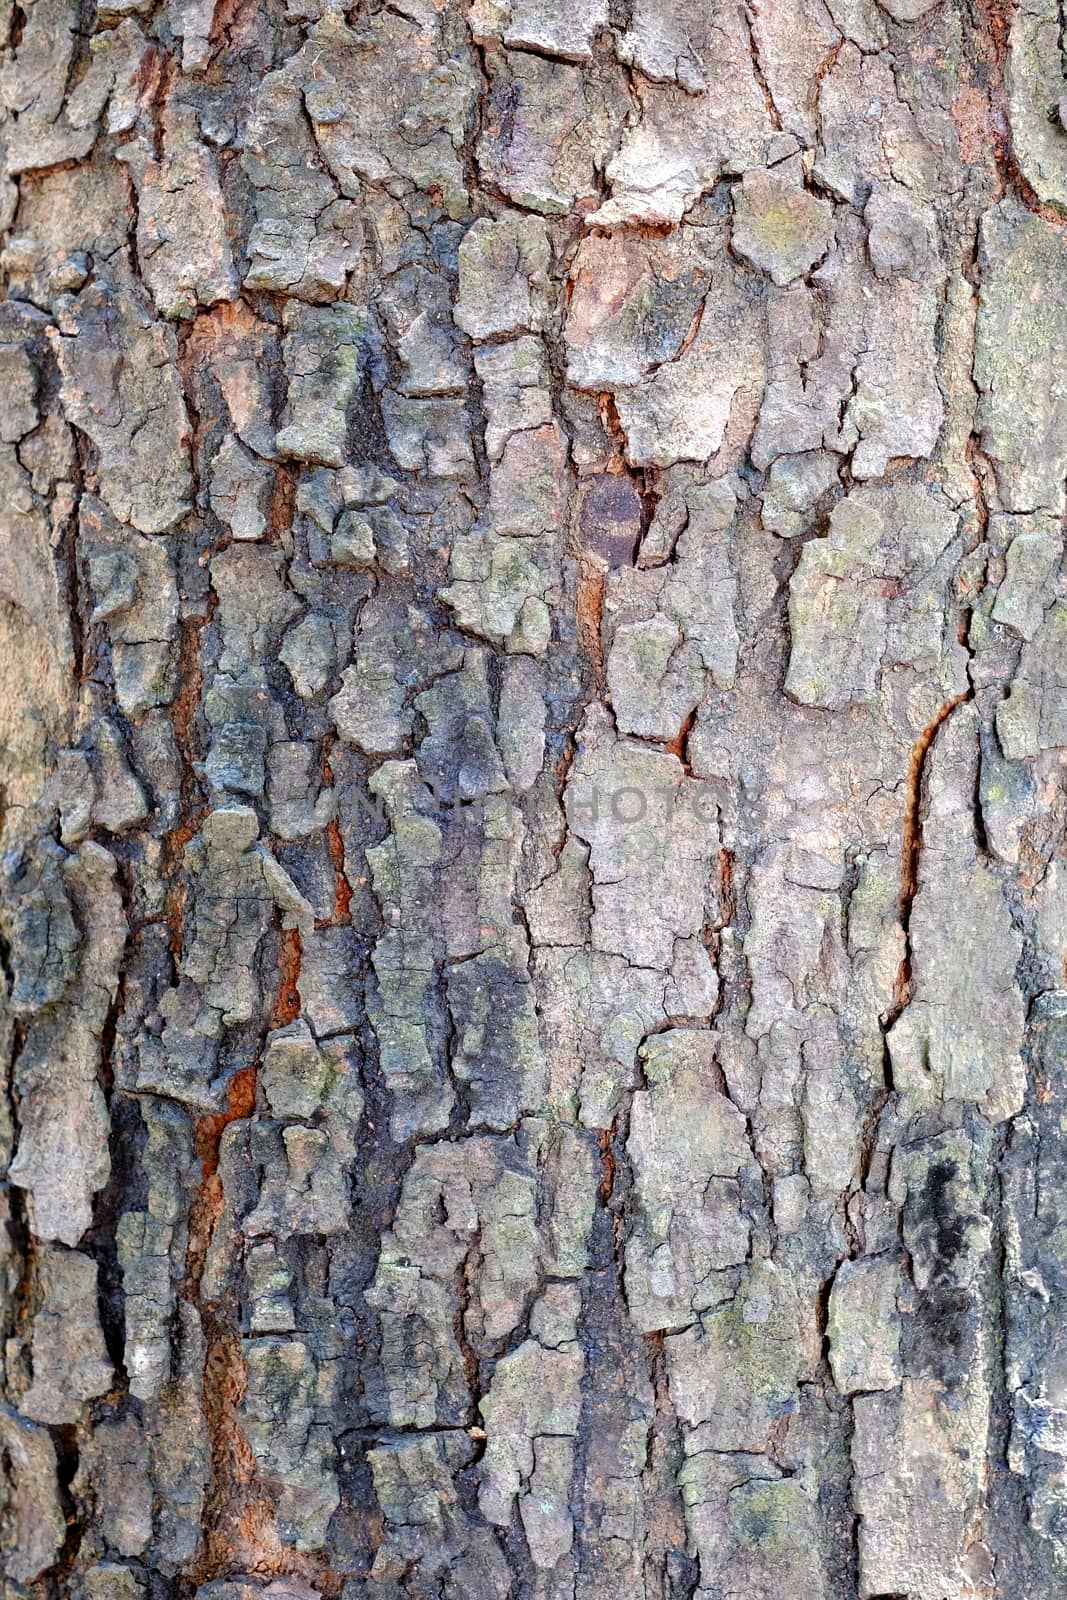 Closed-up Bark Texture Background.